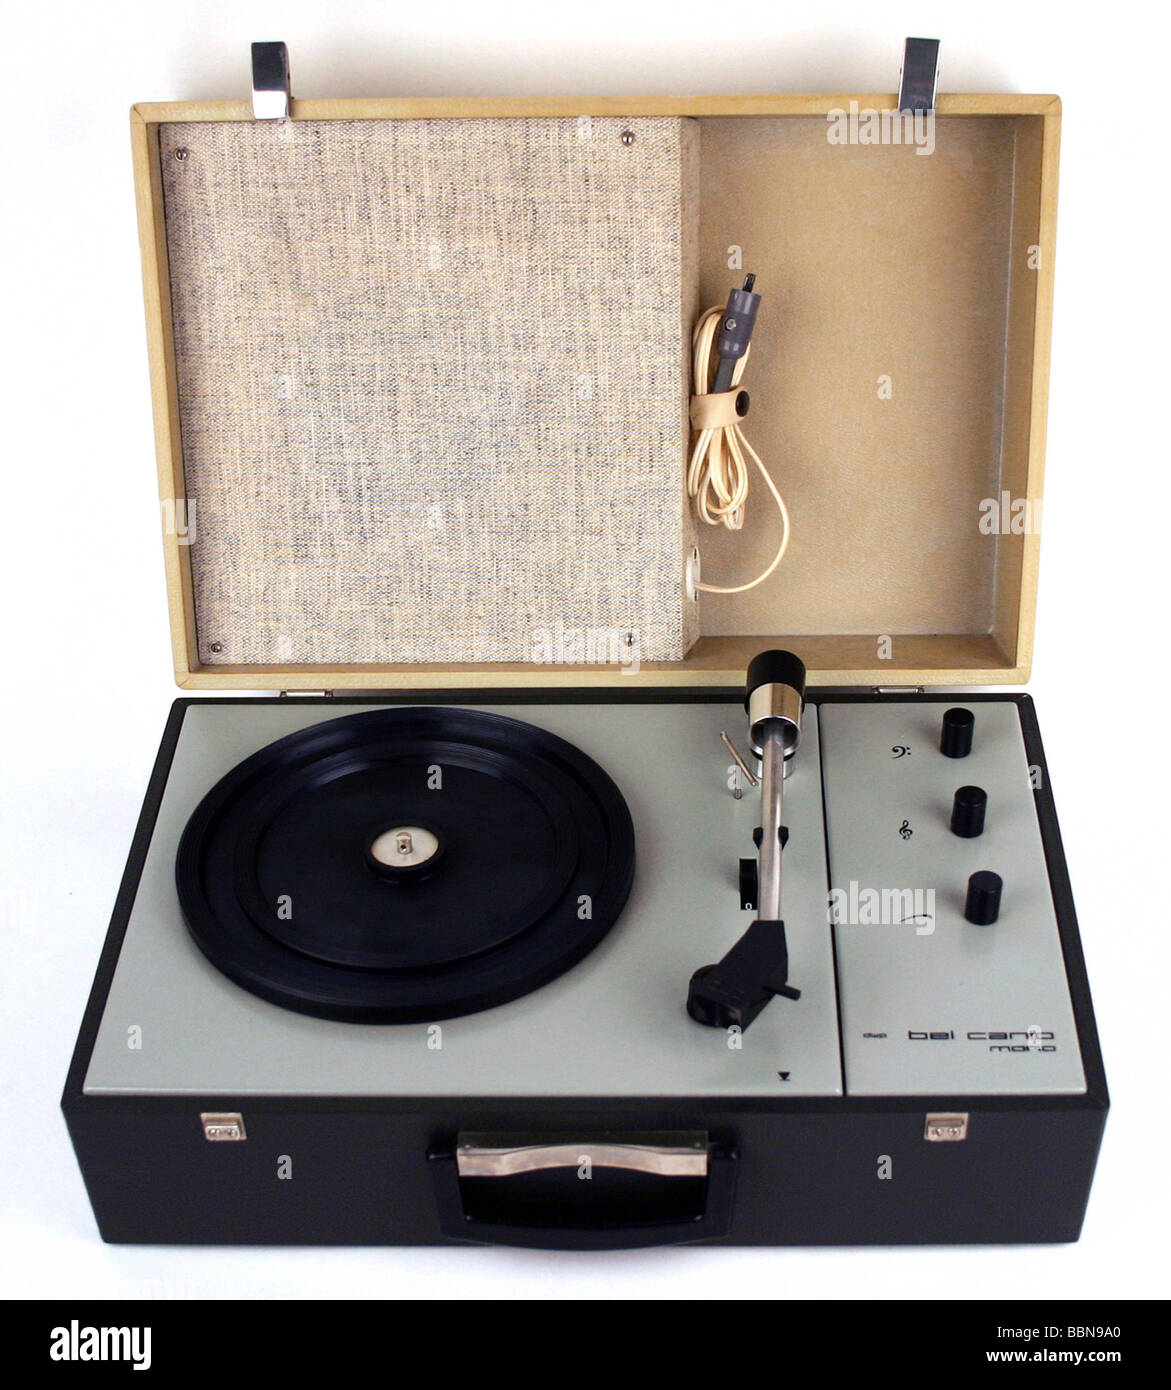 technics, record player, portable record player bel canto mono, made by Delphinwerk Pirna, GDR, 1968, Stock Photo